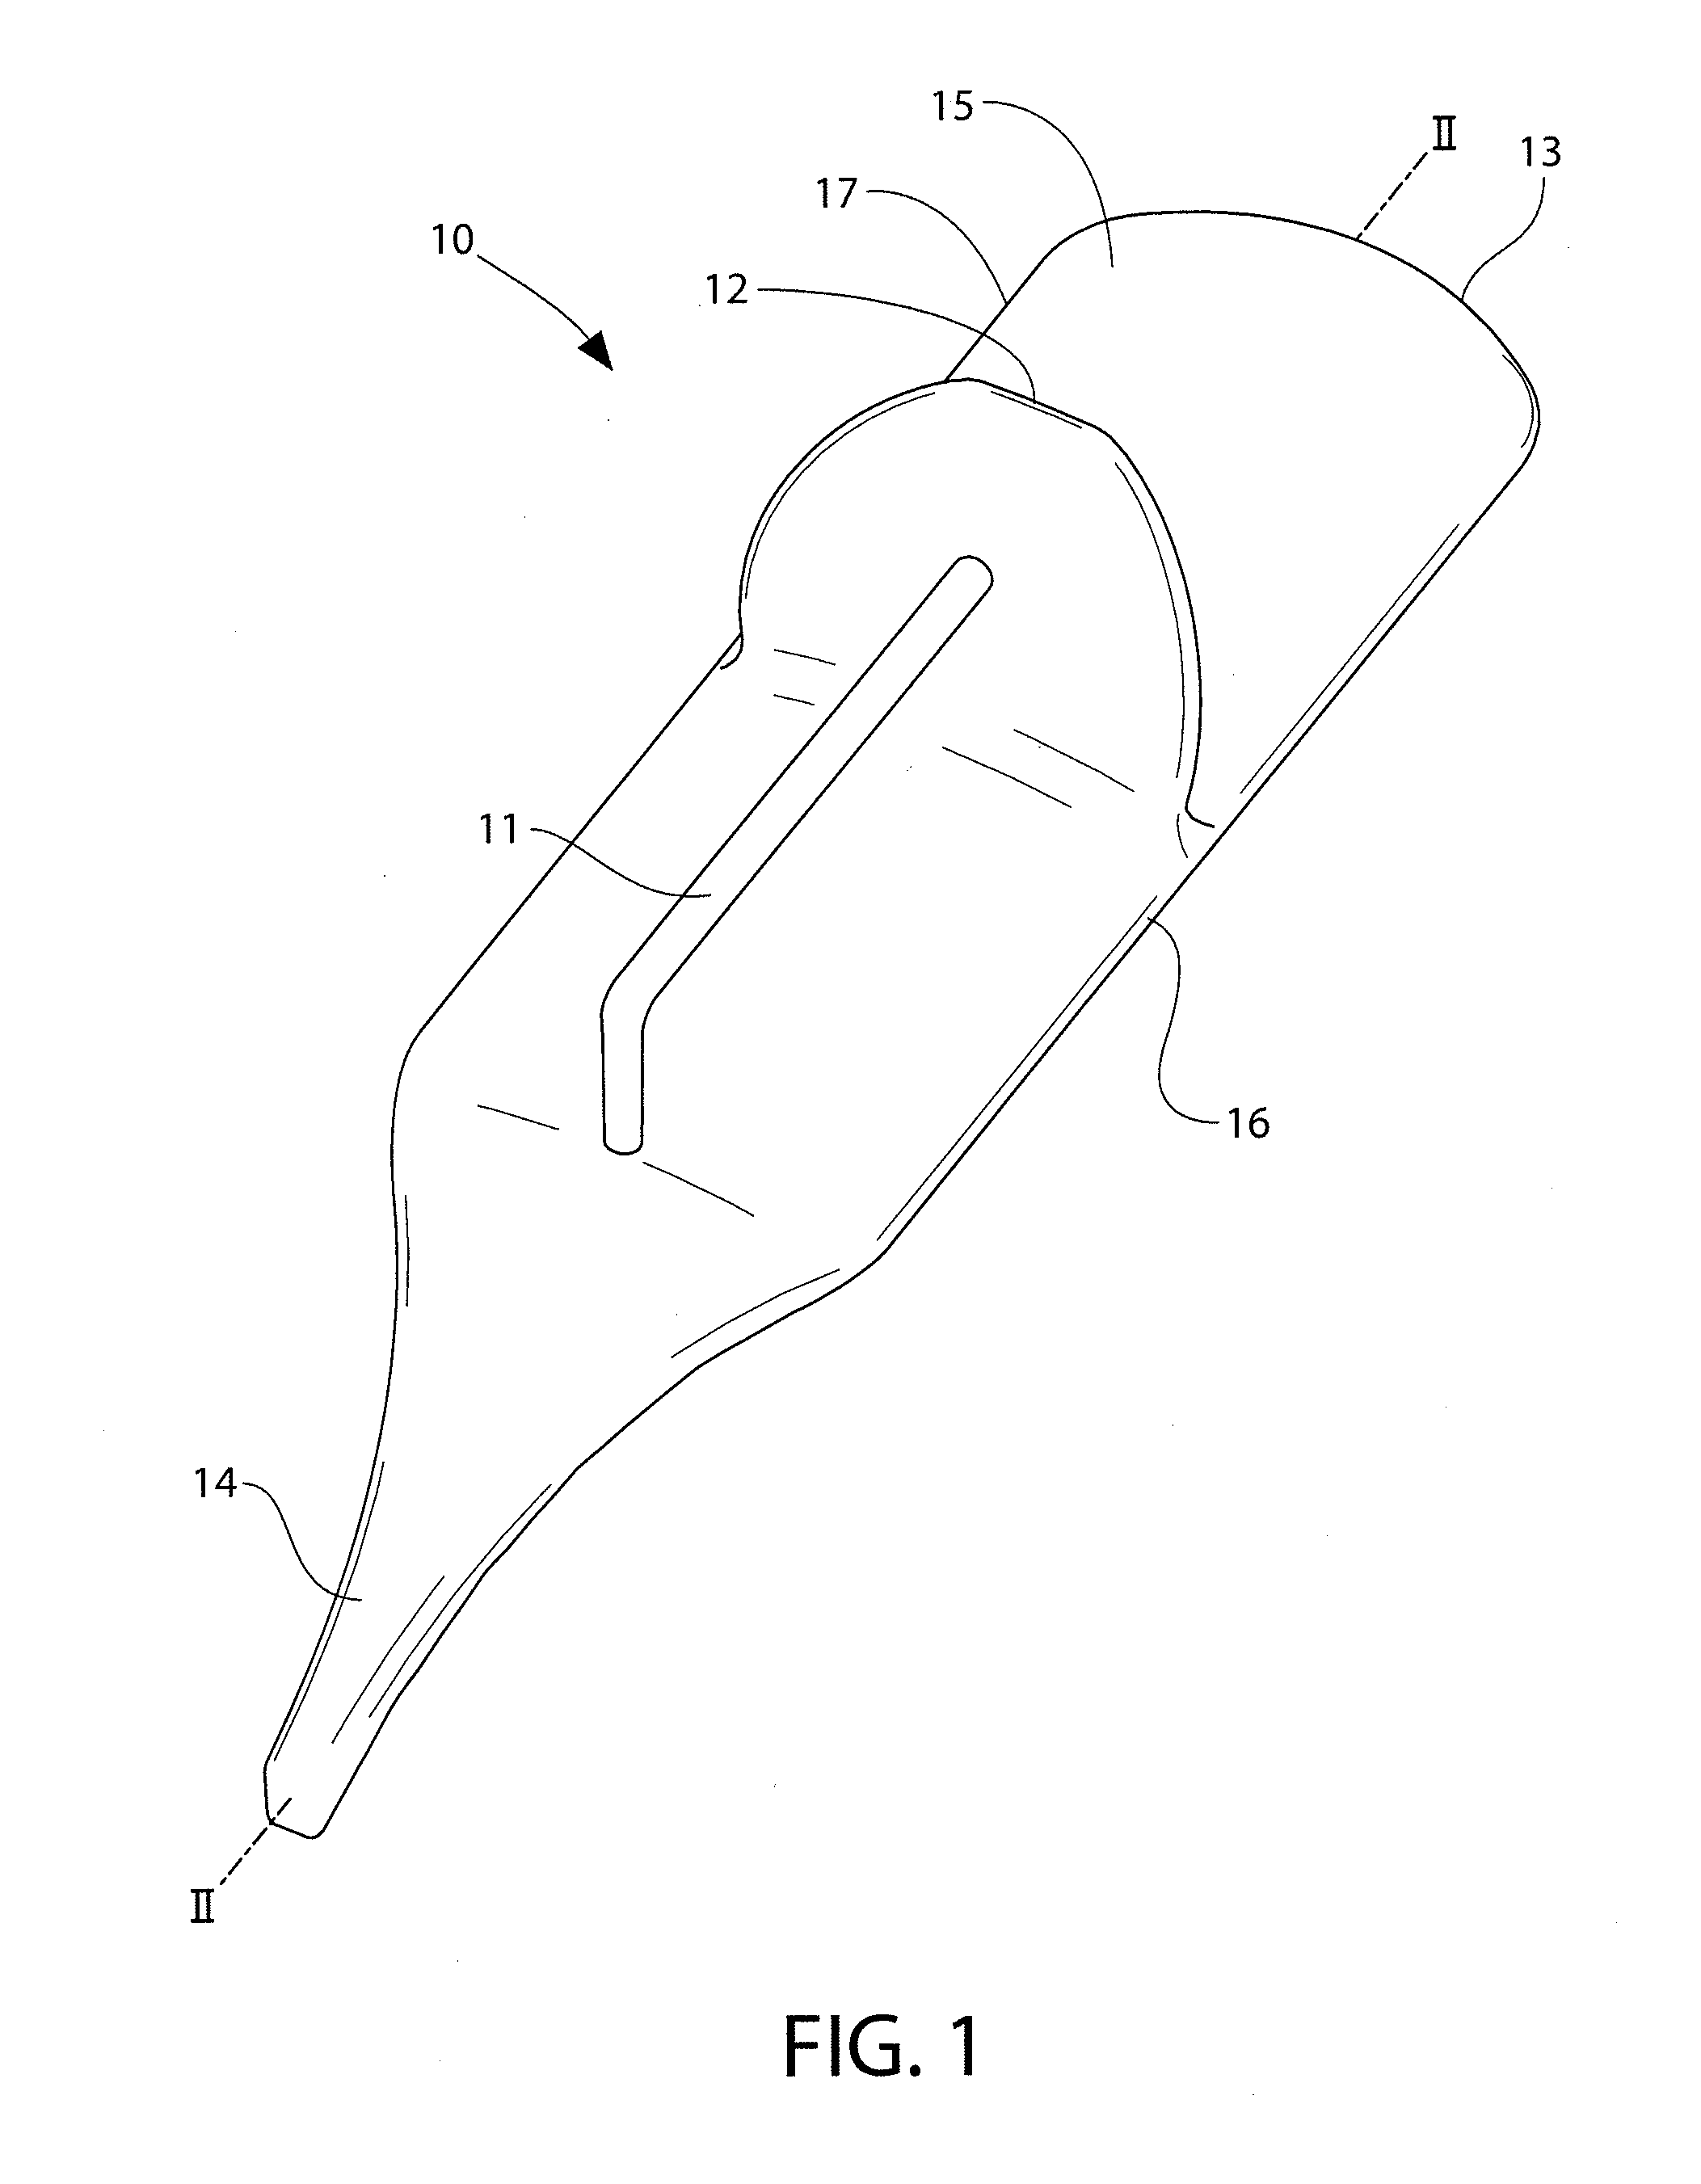 Method and device for facilitating delivery in event of shoulder dystocia